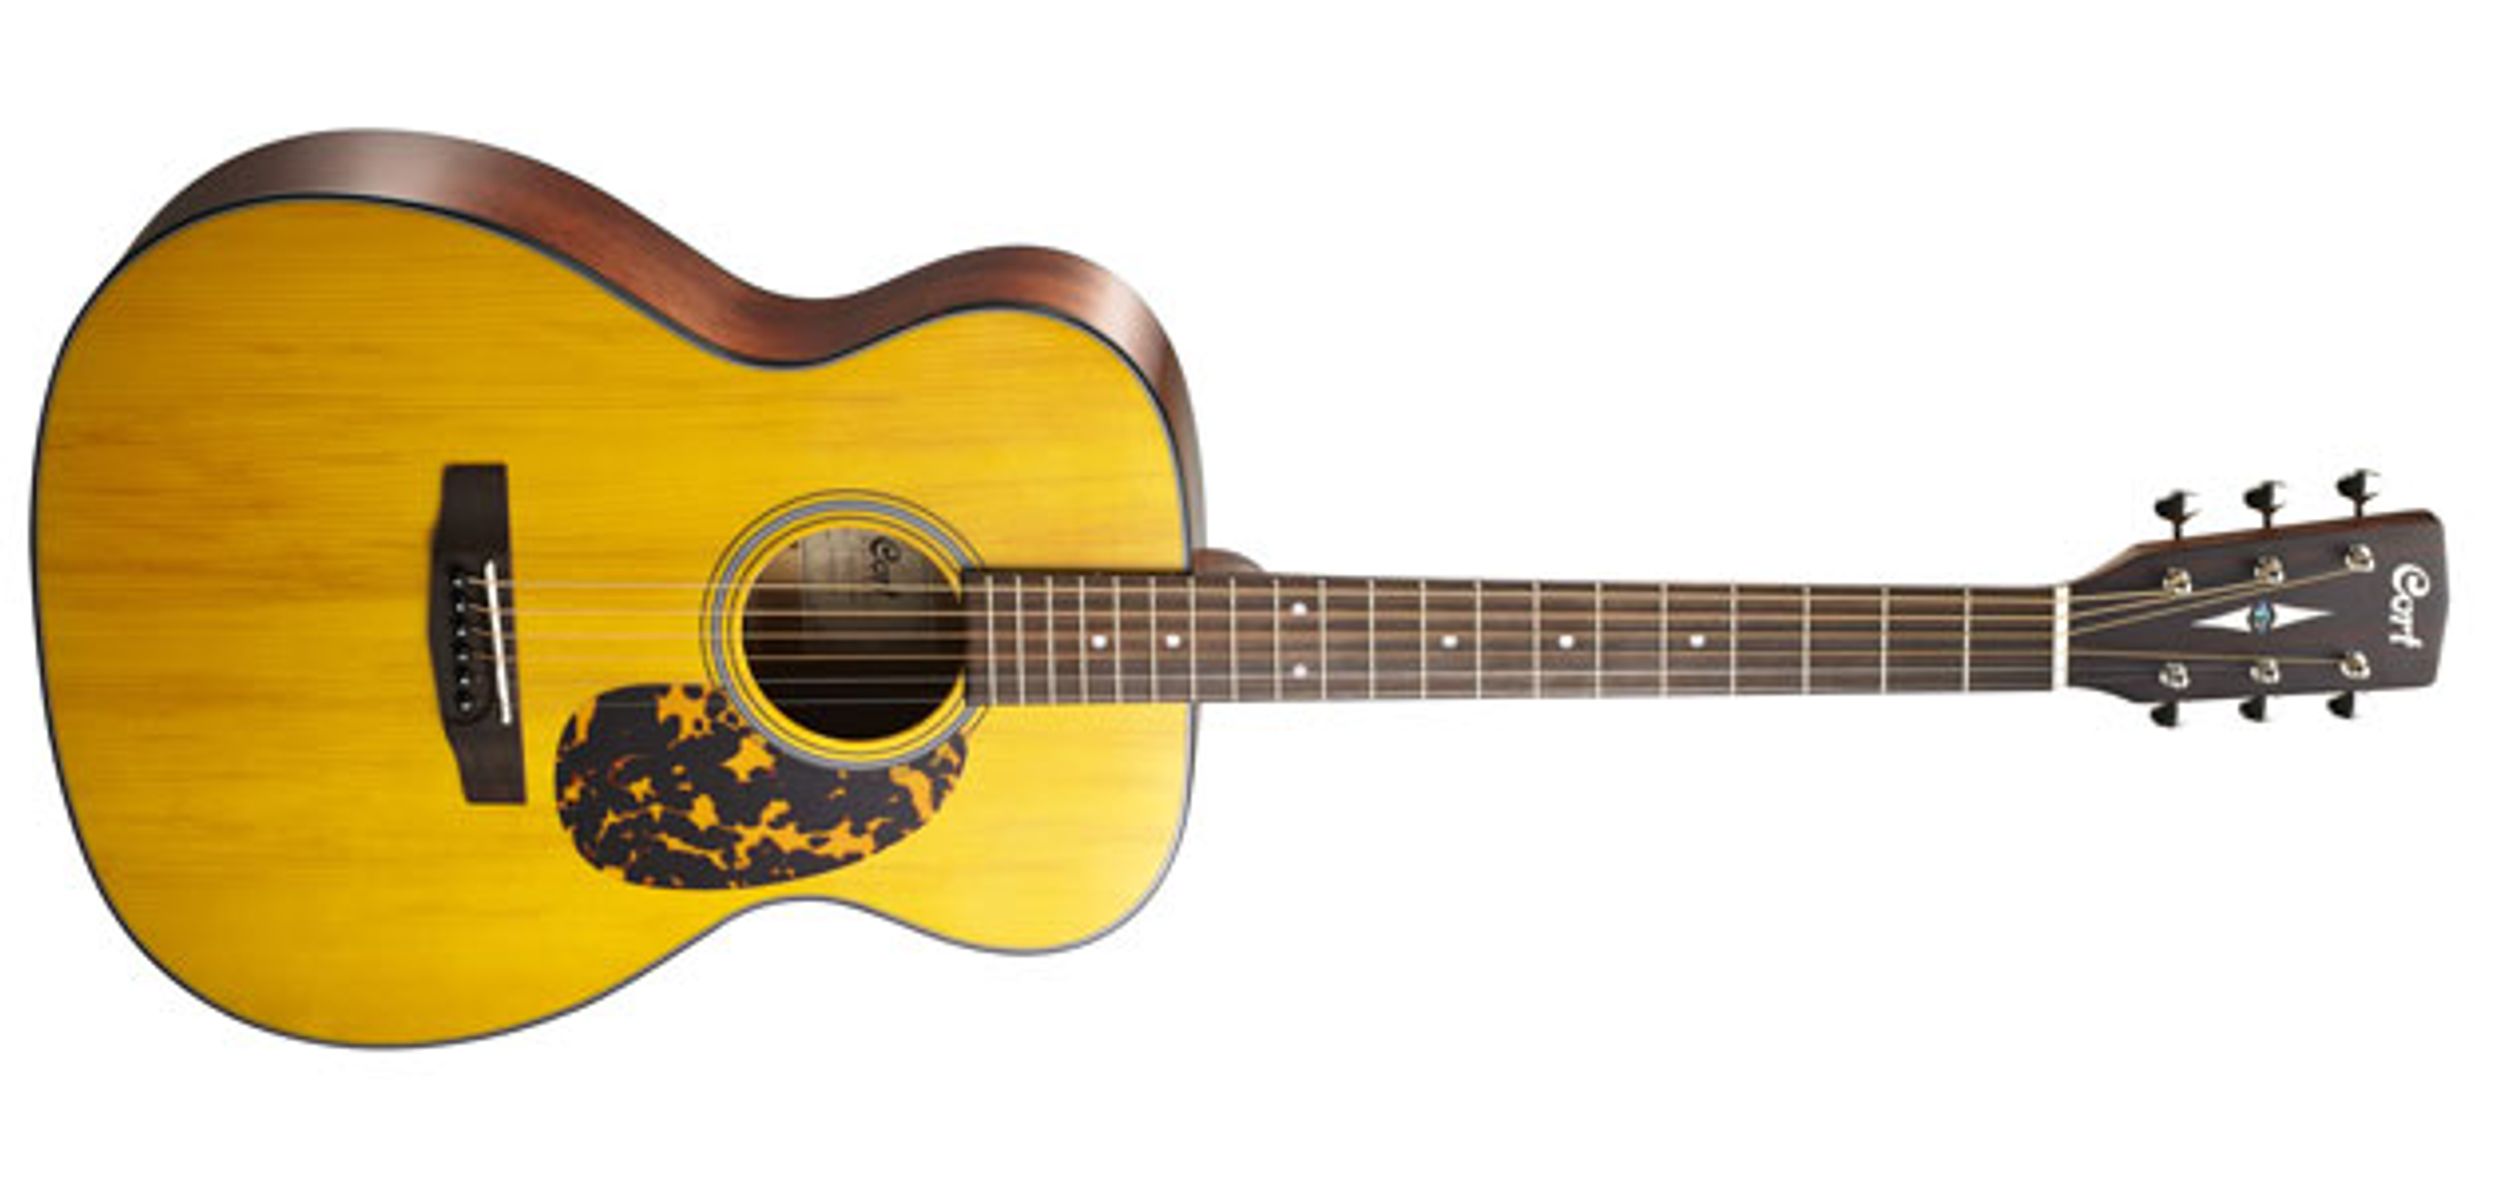 Cort Guitars Expands Luce Series with the L300V